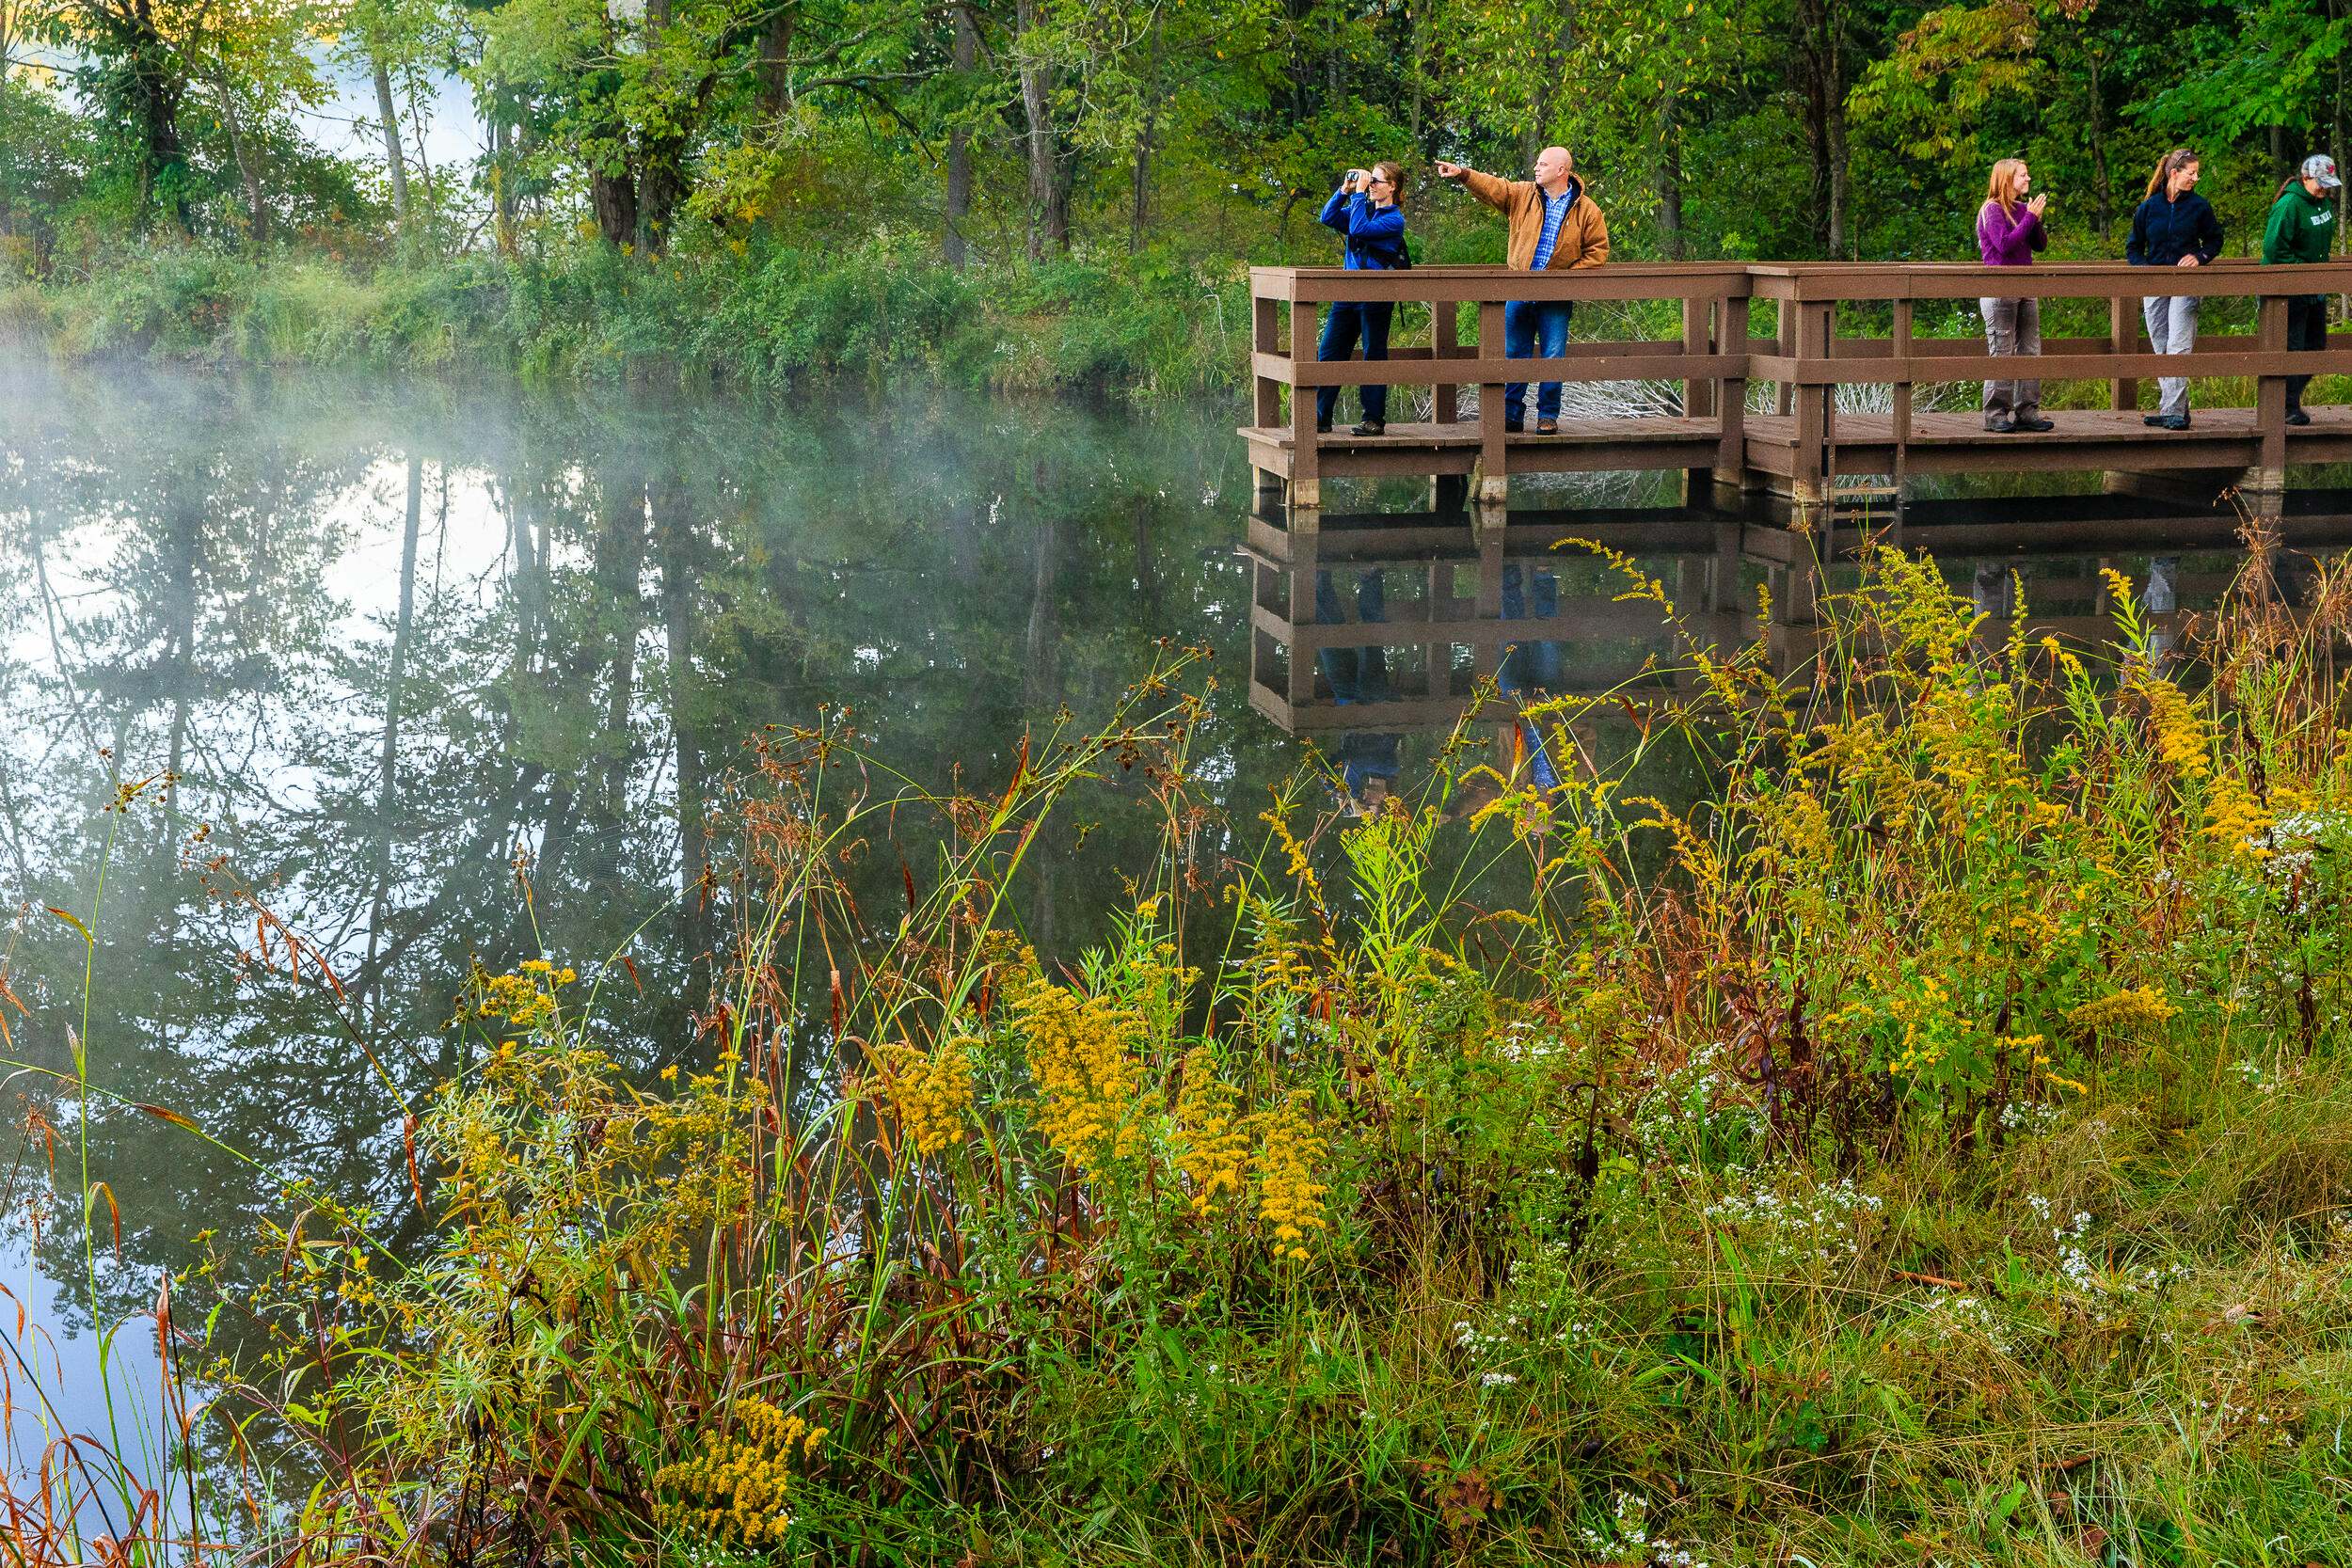 People standing on a wooden dock overlooking a wooded pond.